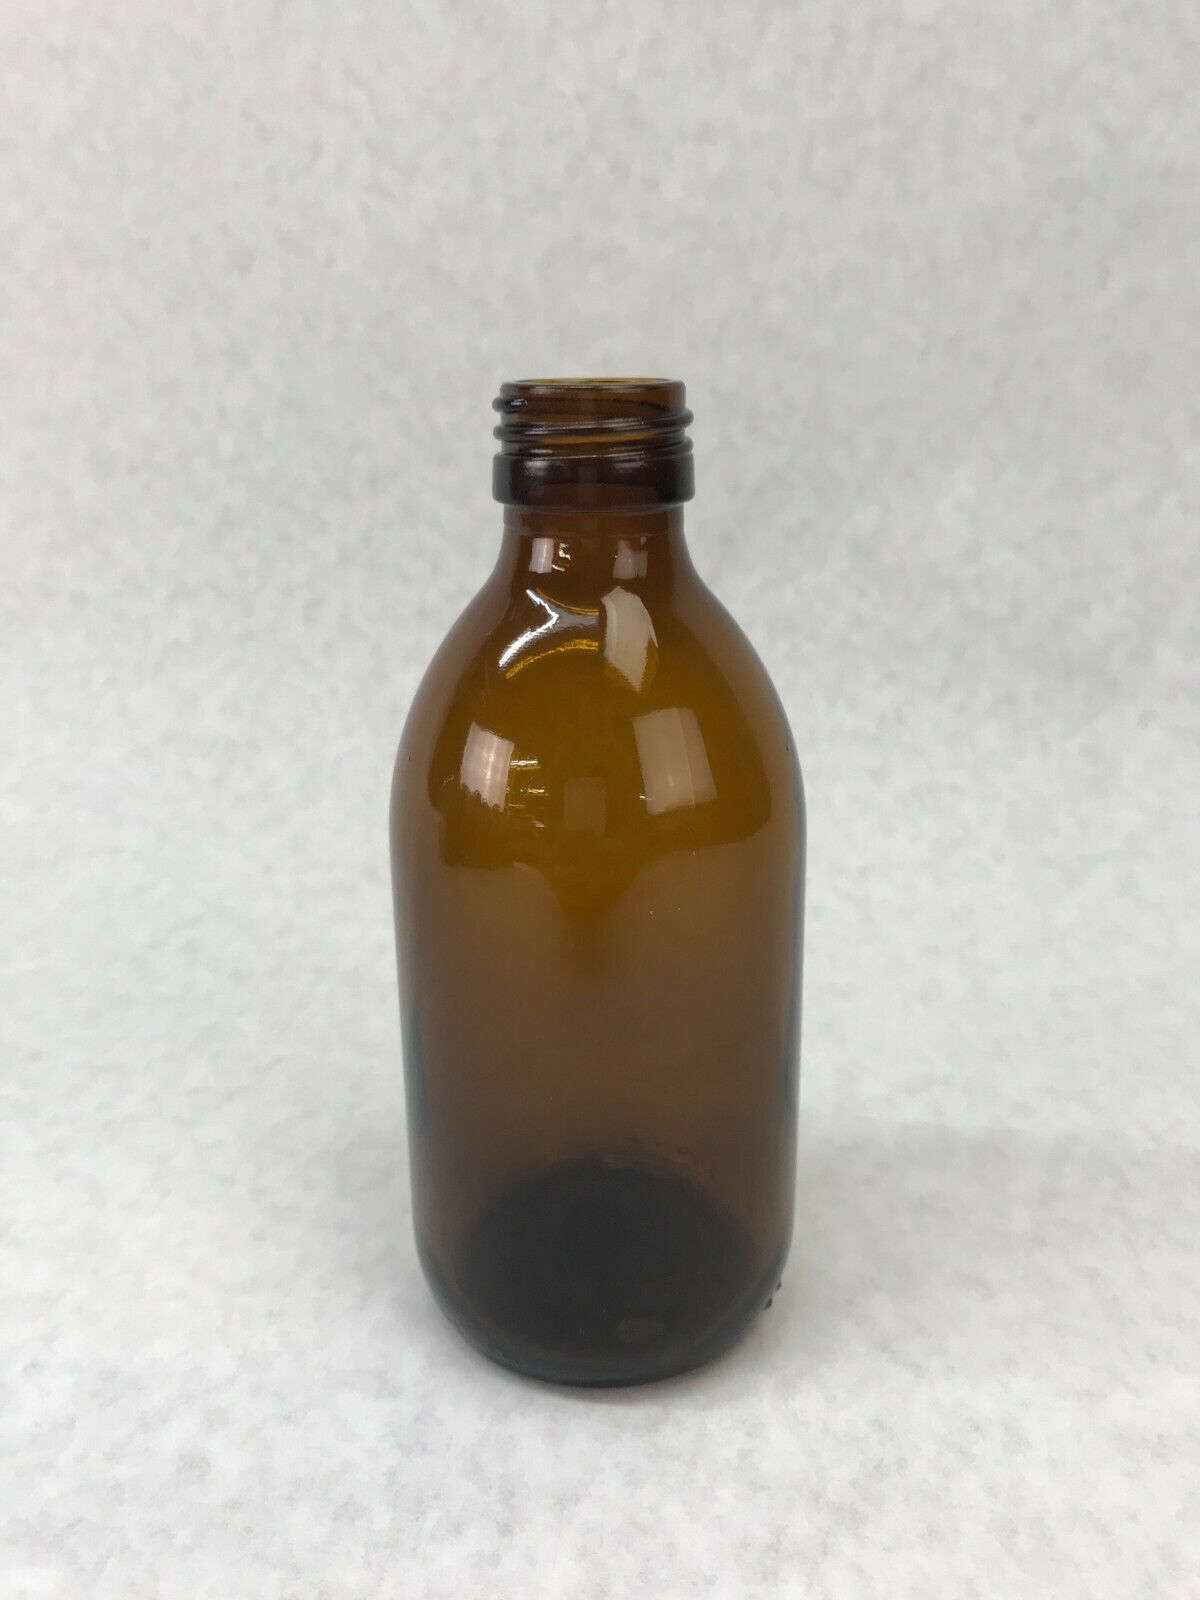 Lot of 60 250ml Brown Glass Bottles Chemistry Science Lab No Caps